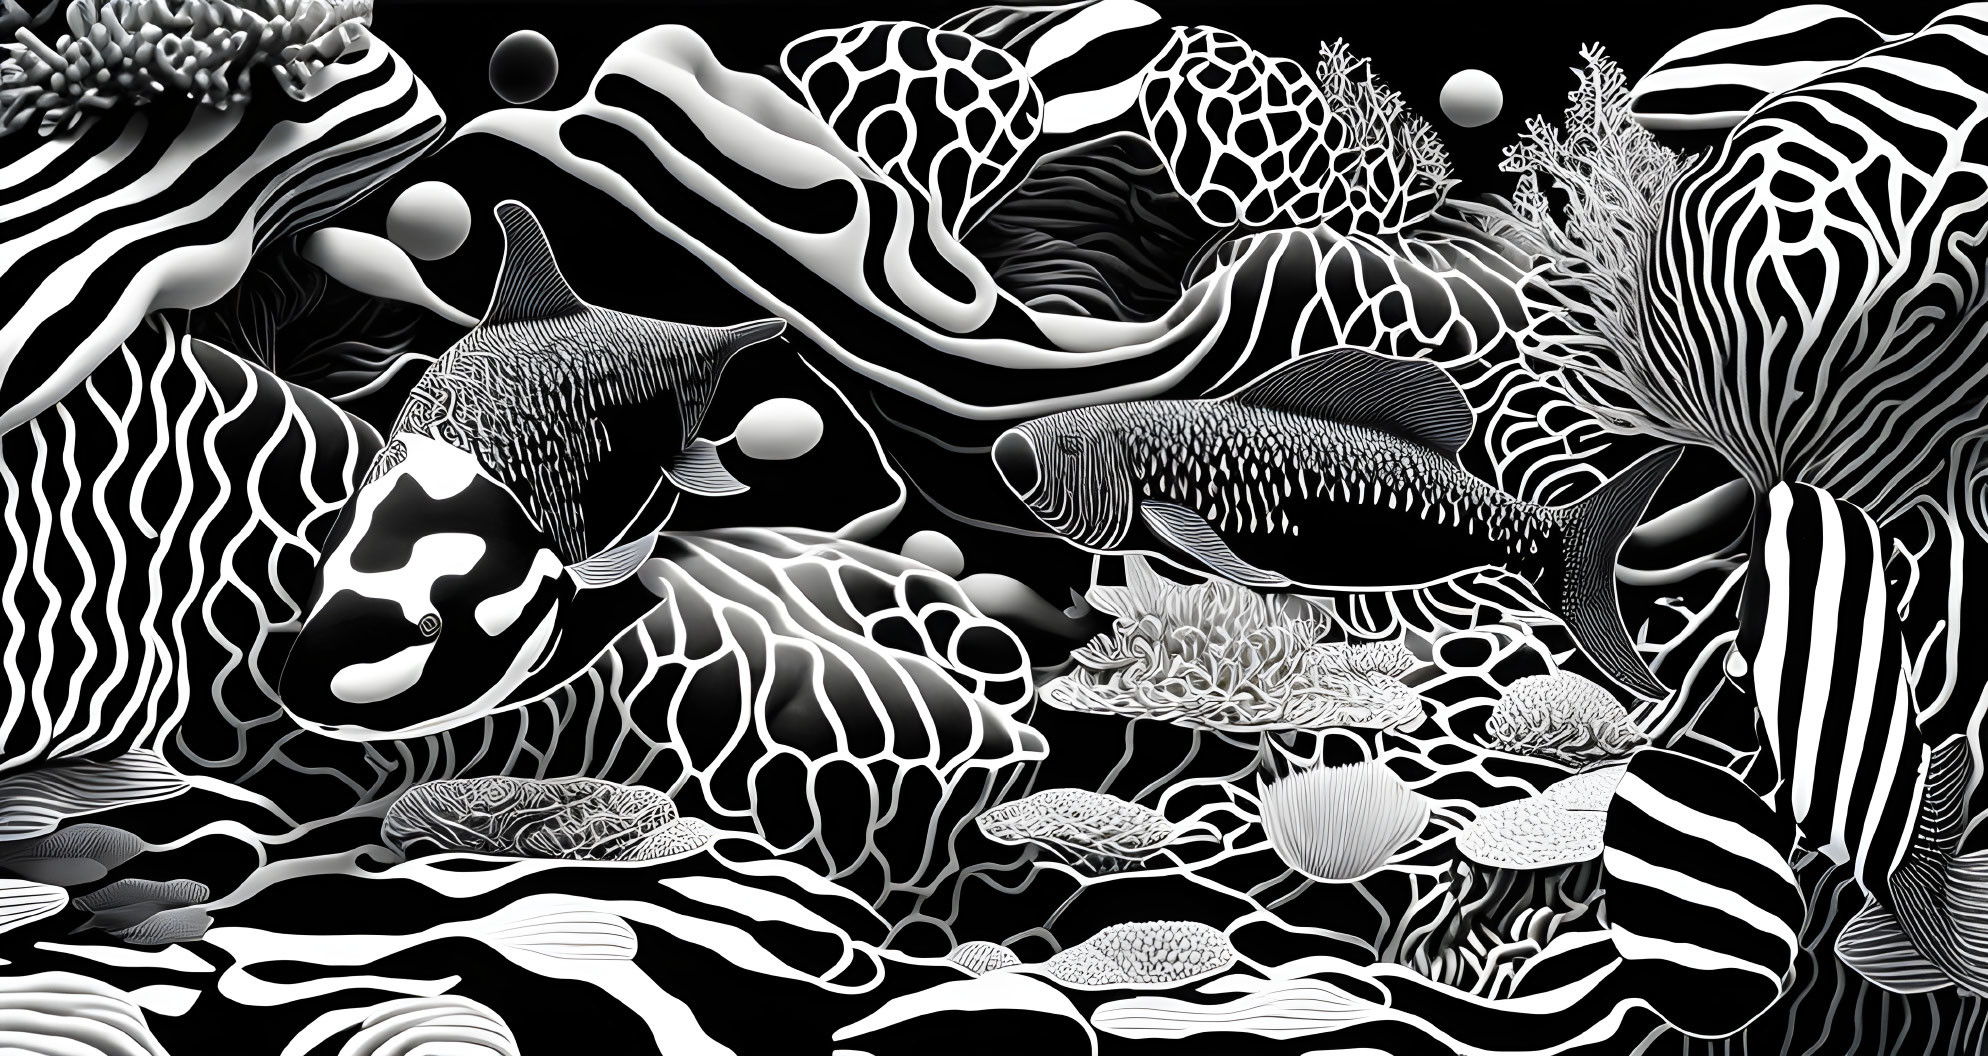 The Black and White Reef